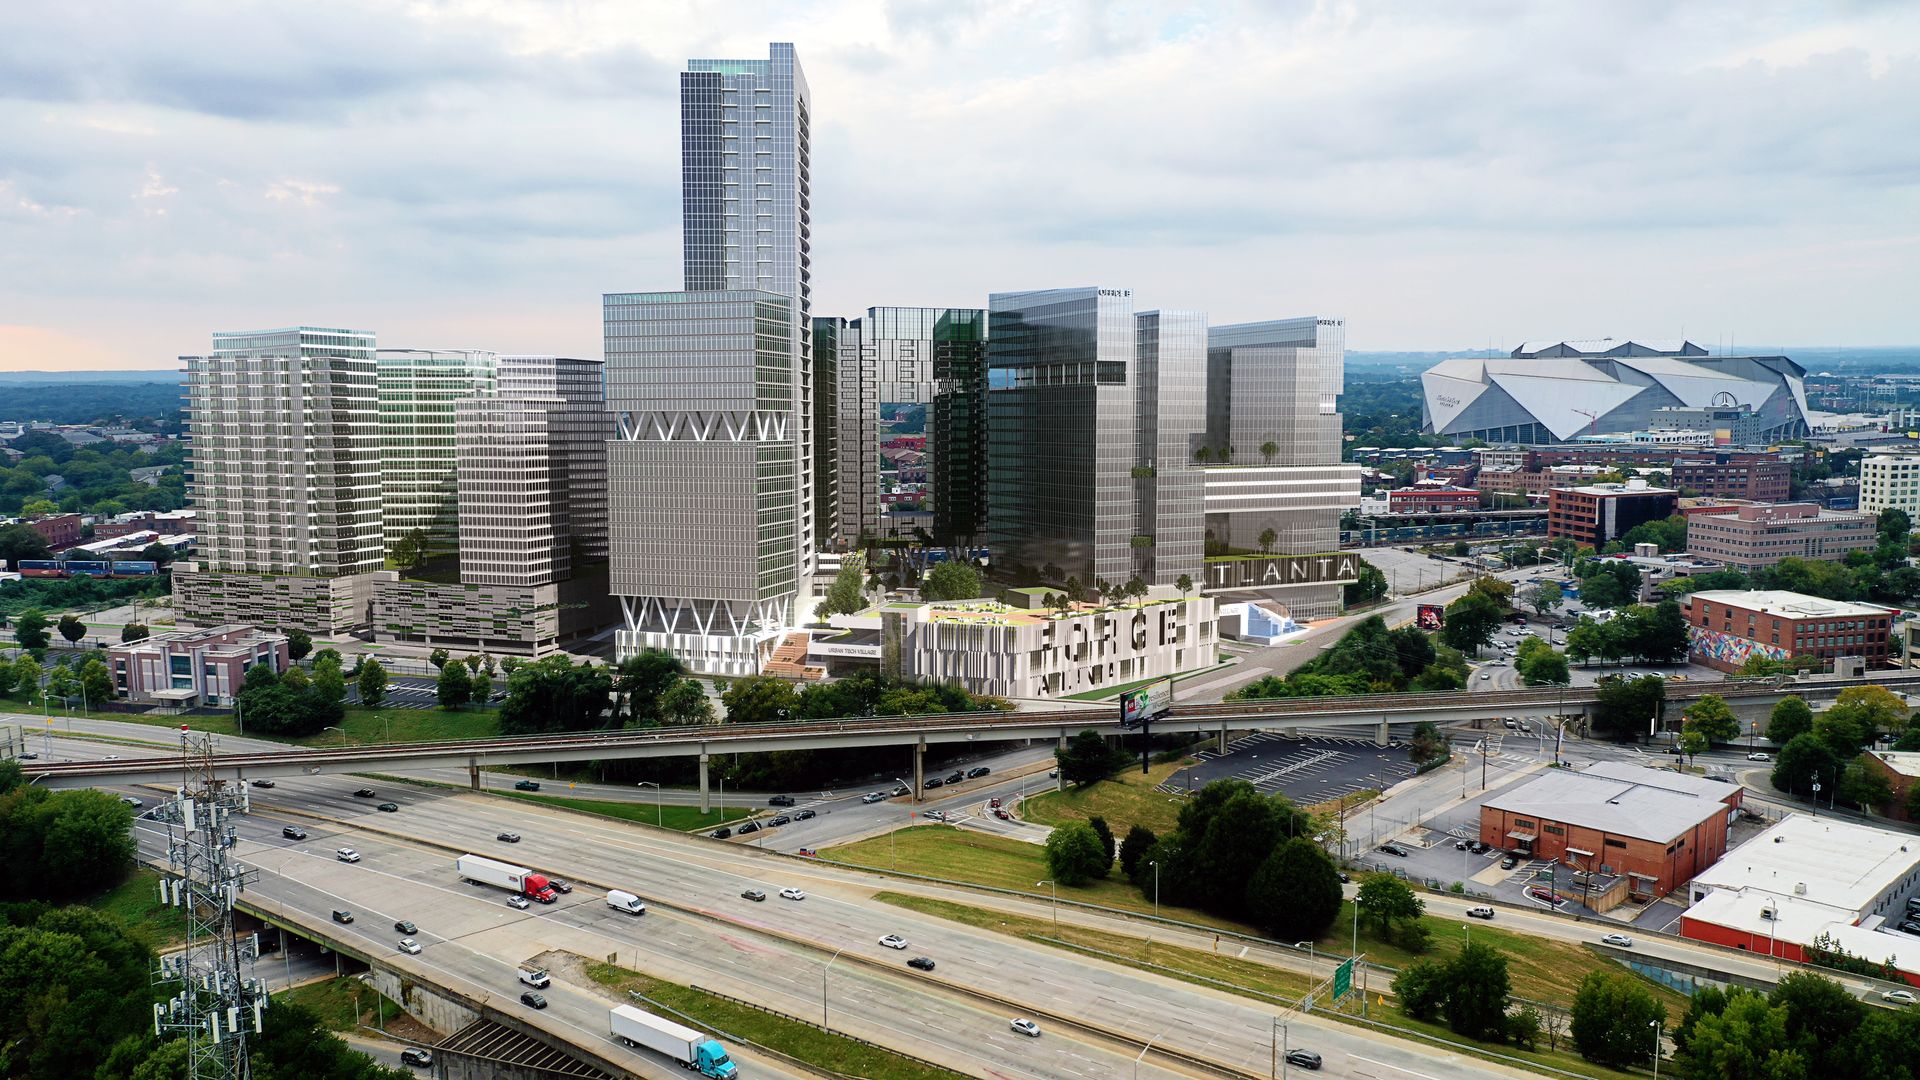 Rendering of the proposed Forge Atlanta redeveloment project.